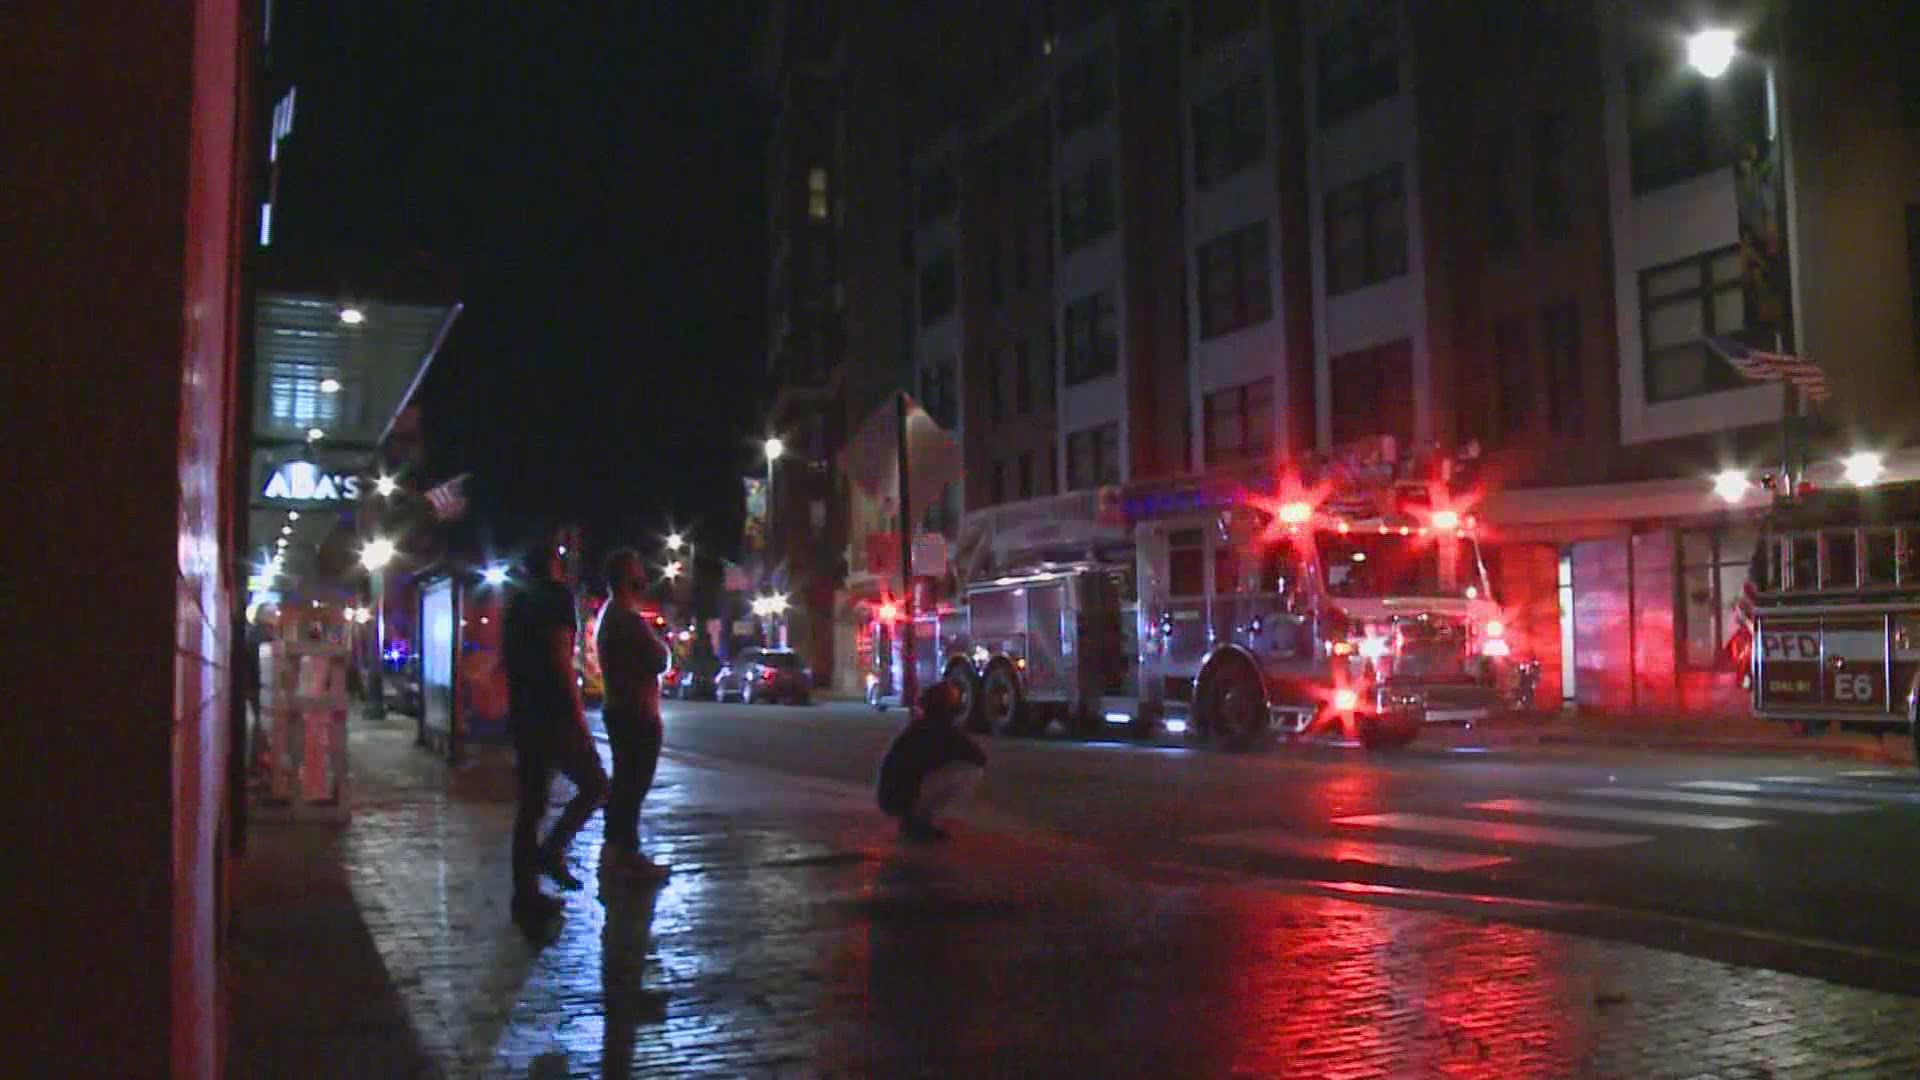 Crews in Portland fought a fifth floor apartment fire at 645 congress street